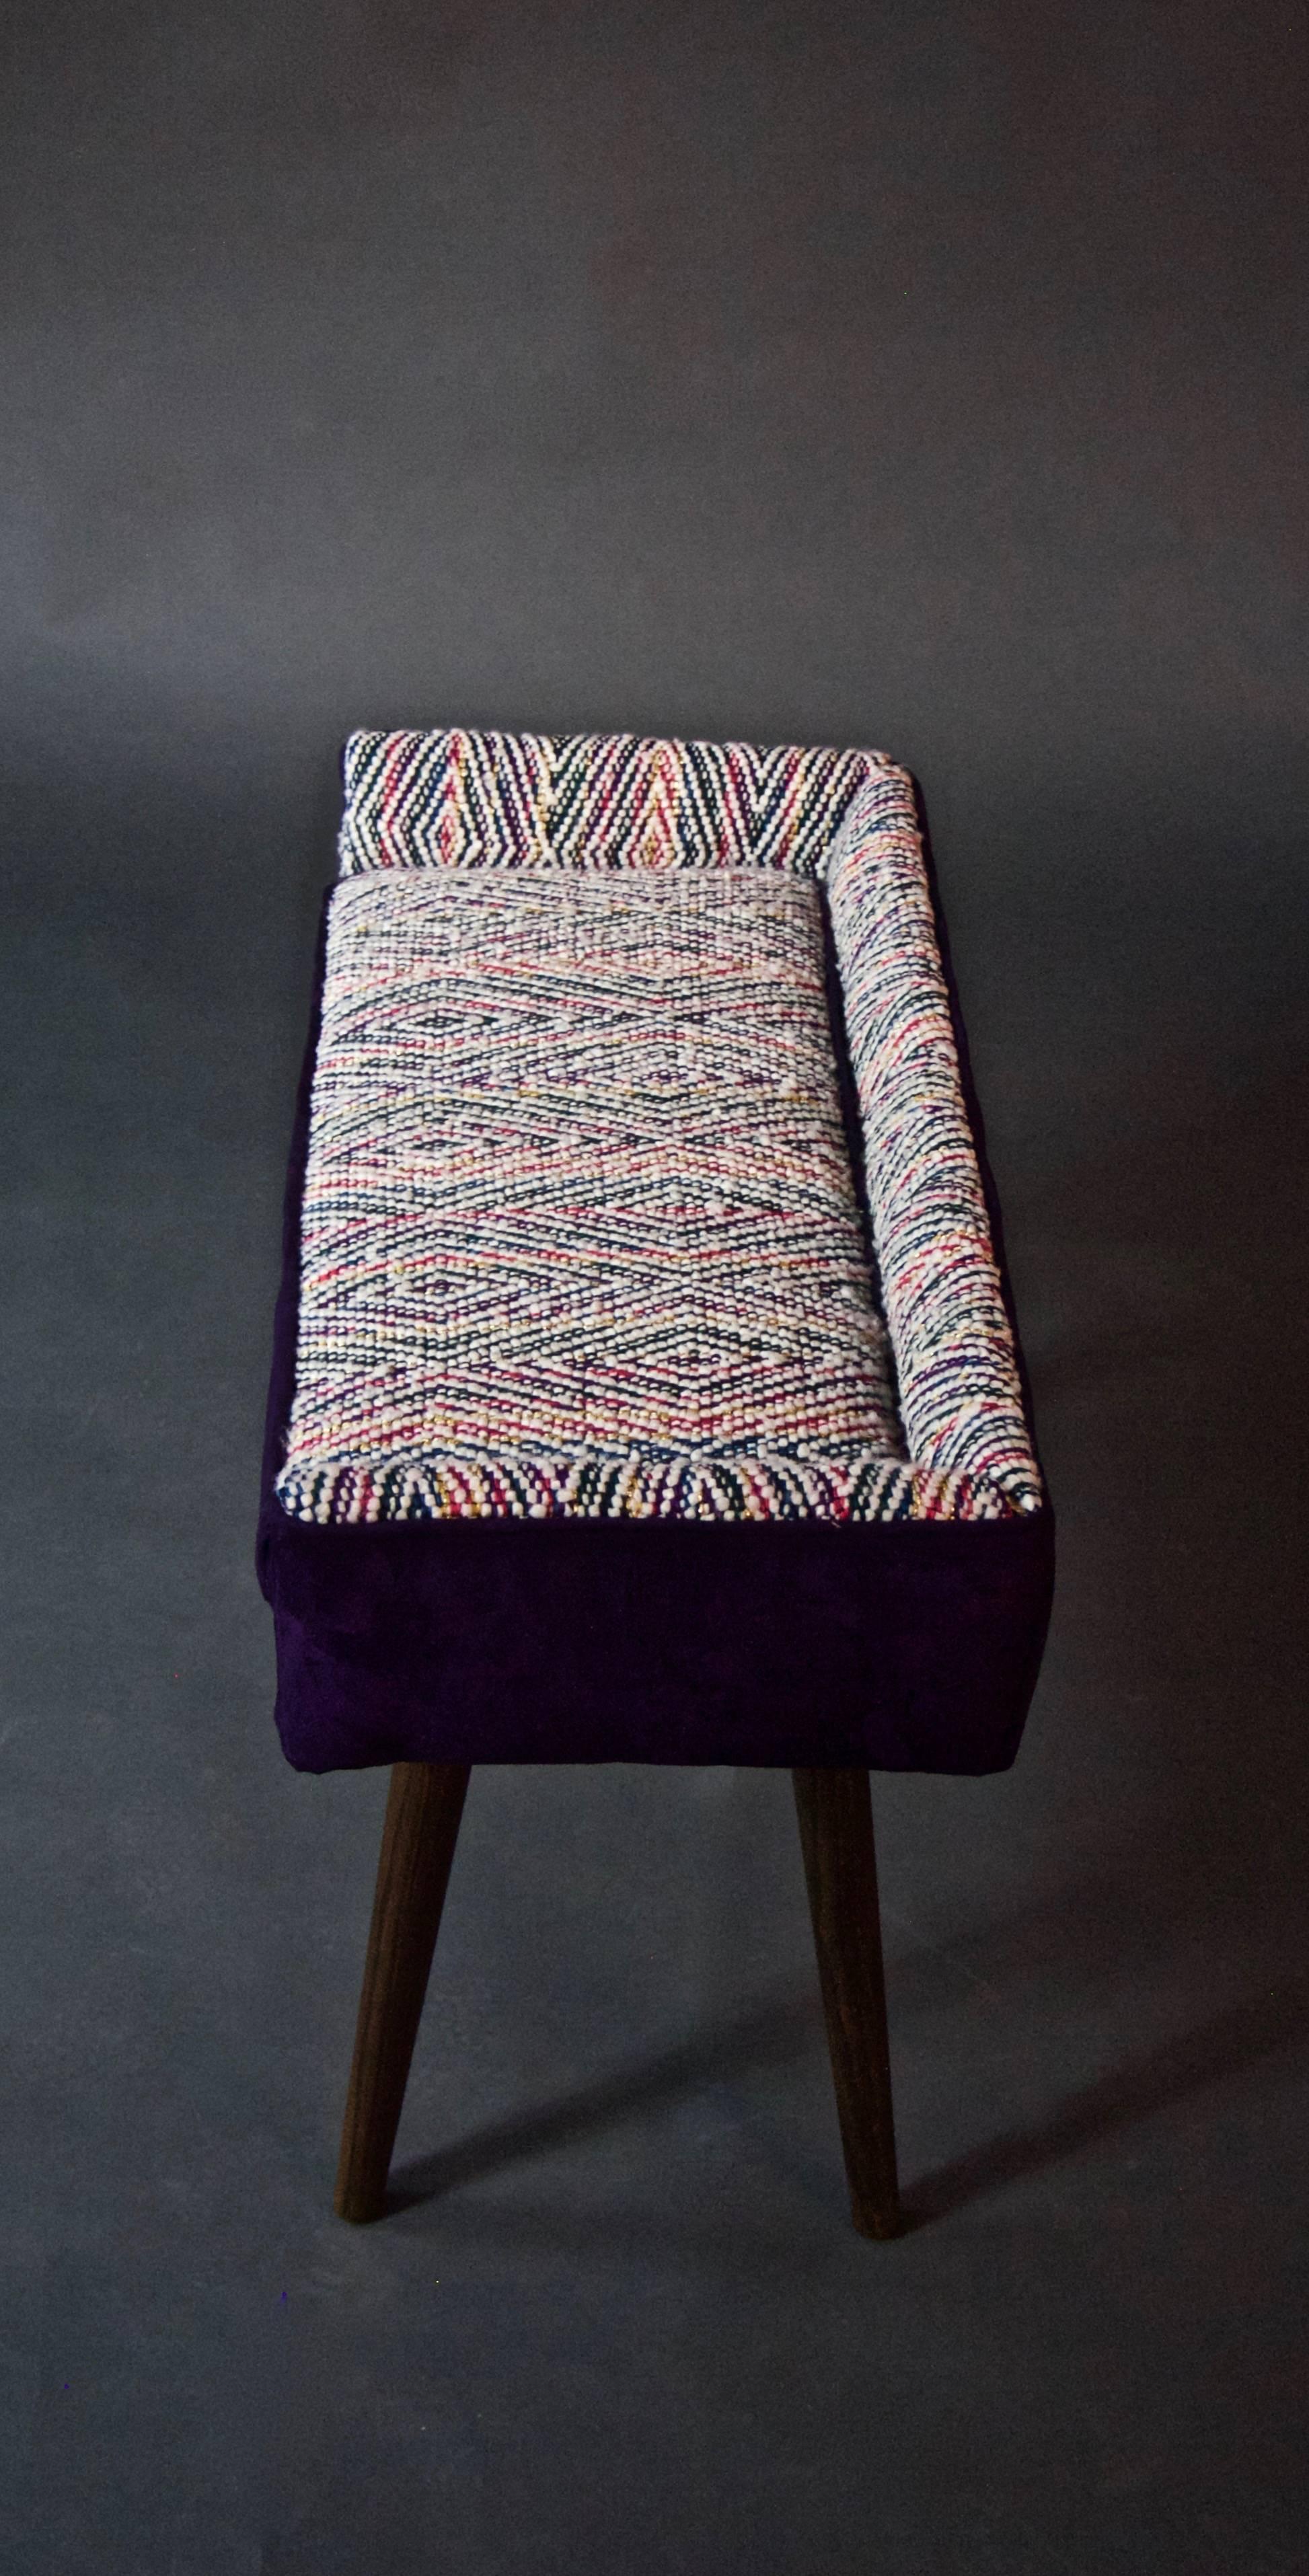 American Mid-Century Inspired Vanity-Sized Stool with Handmade Wool Textile--in stock